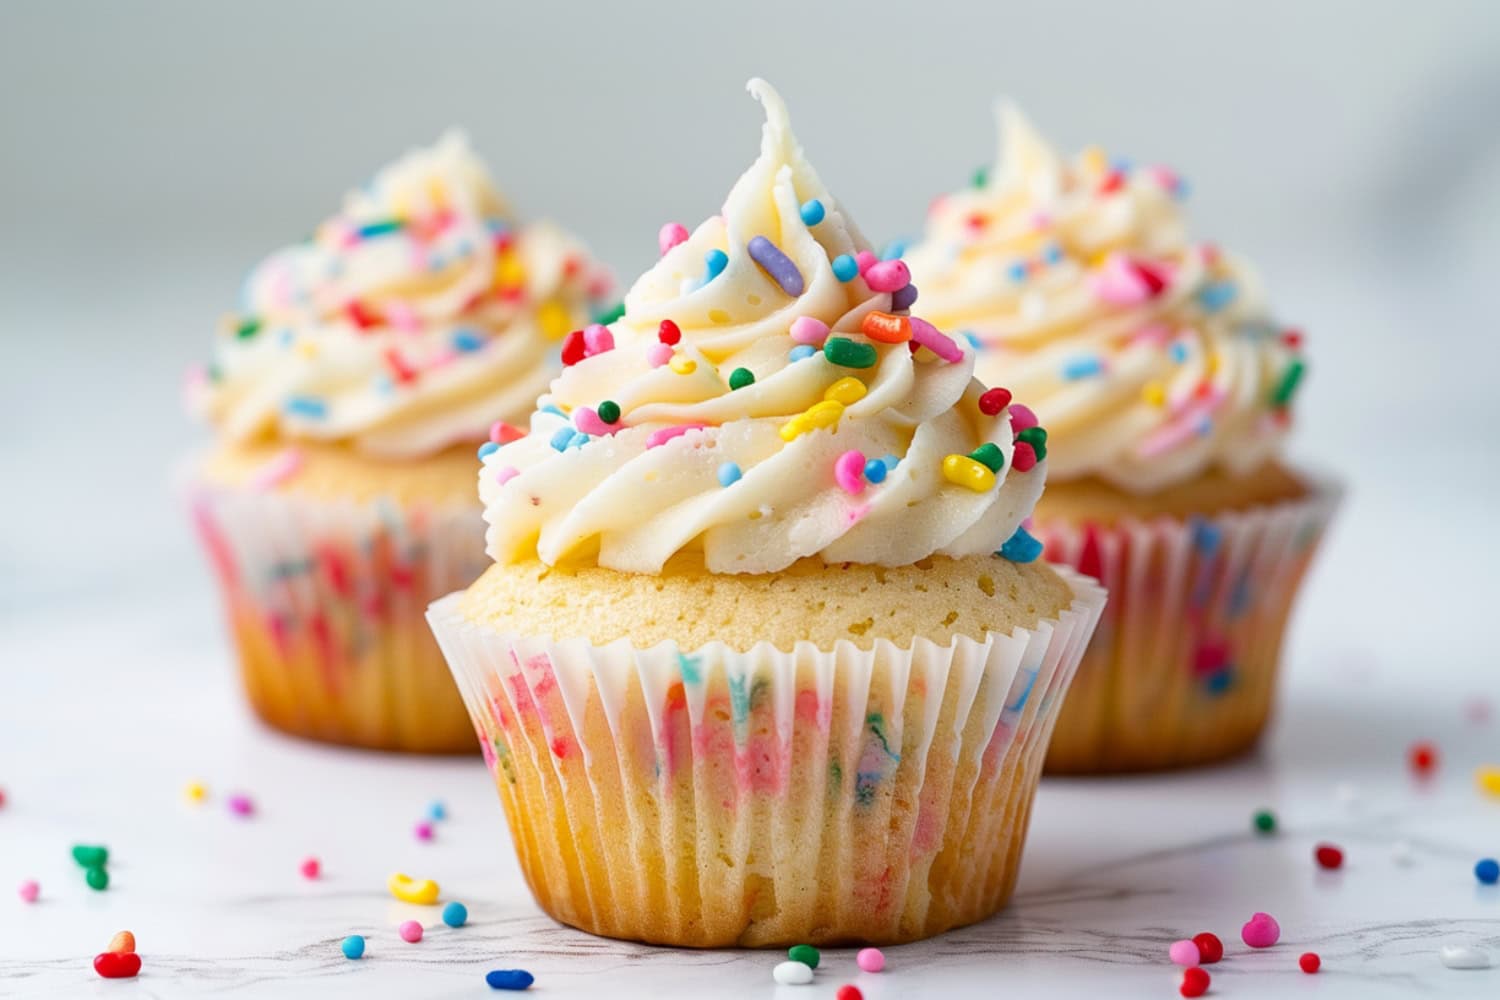 Flavorful funfetti cupcakes, topped with smooth buttercream and a scattering of colorful sprinkles.